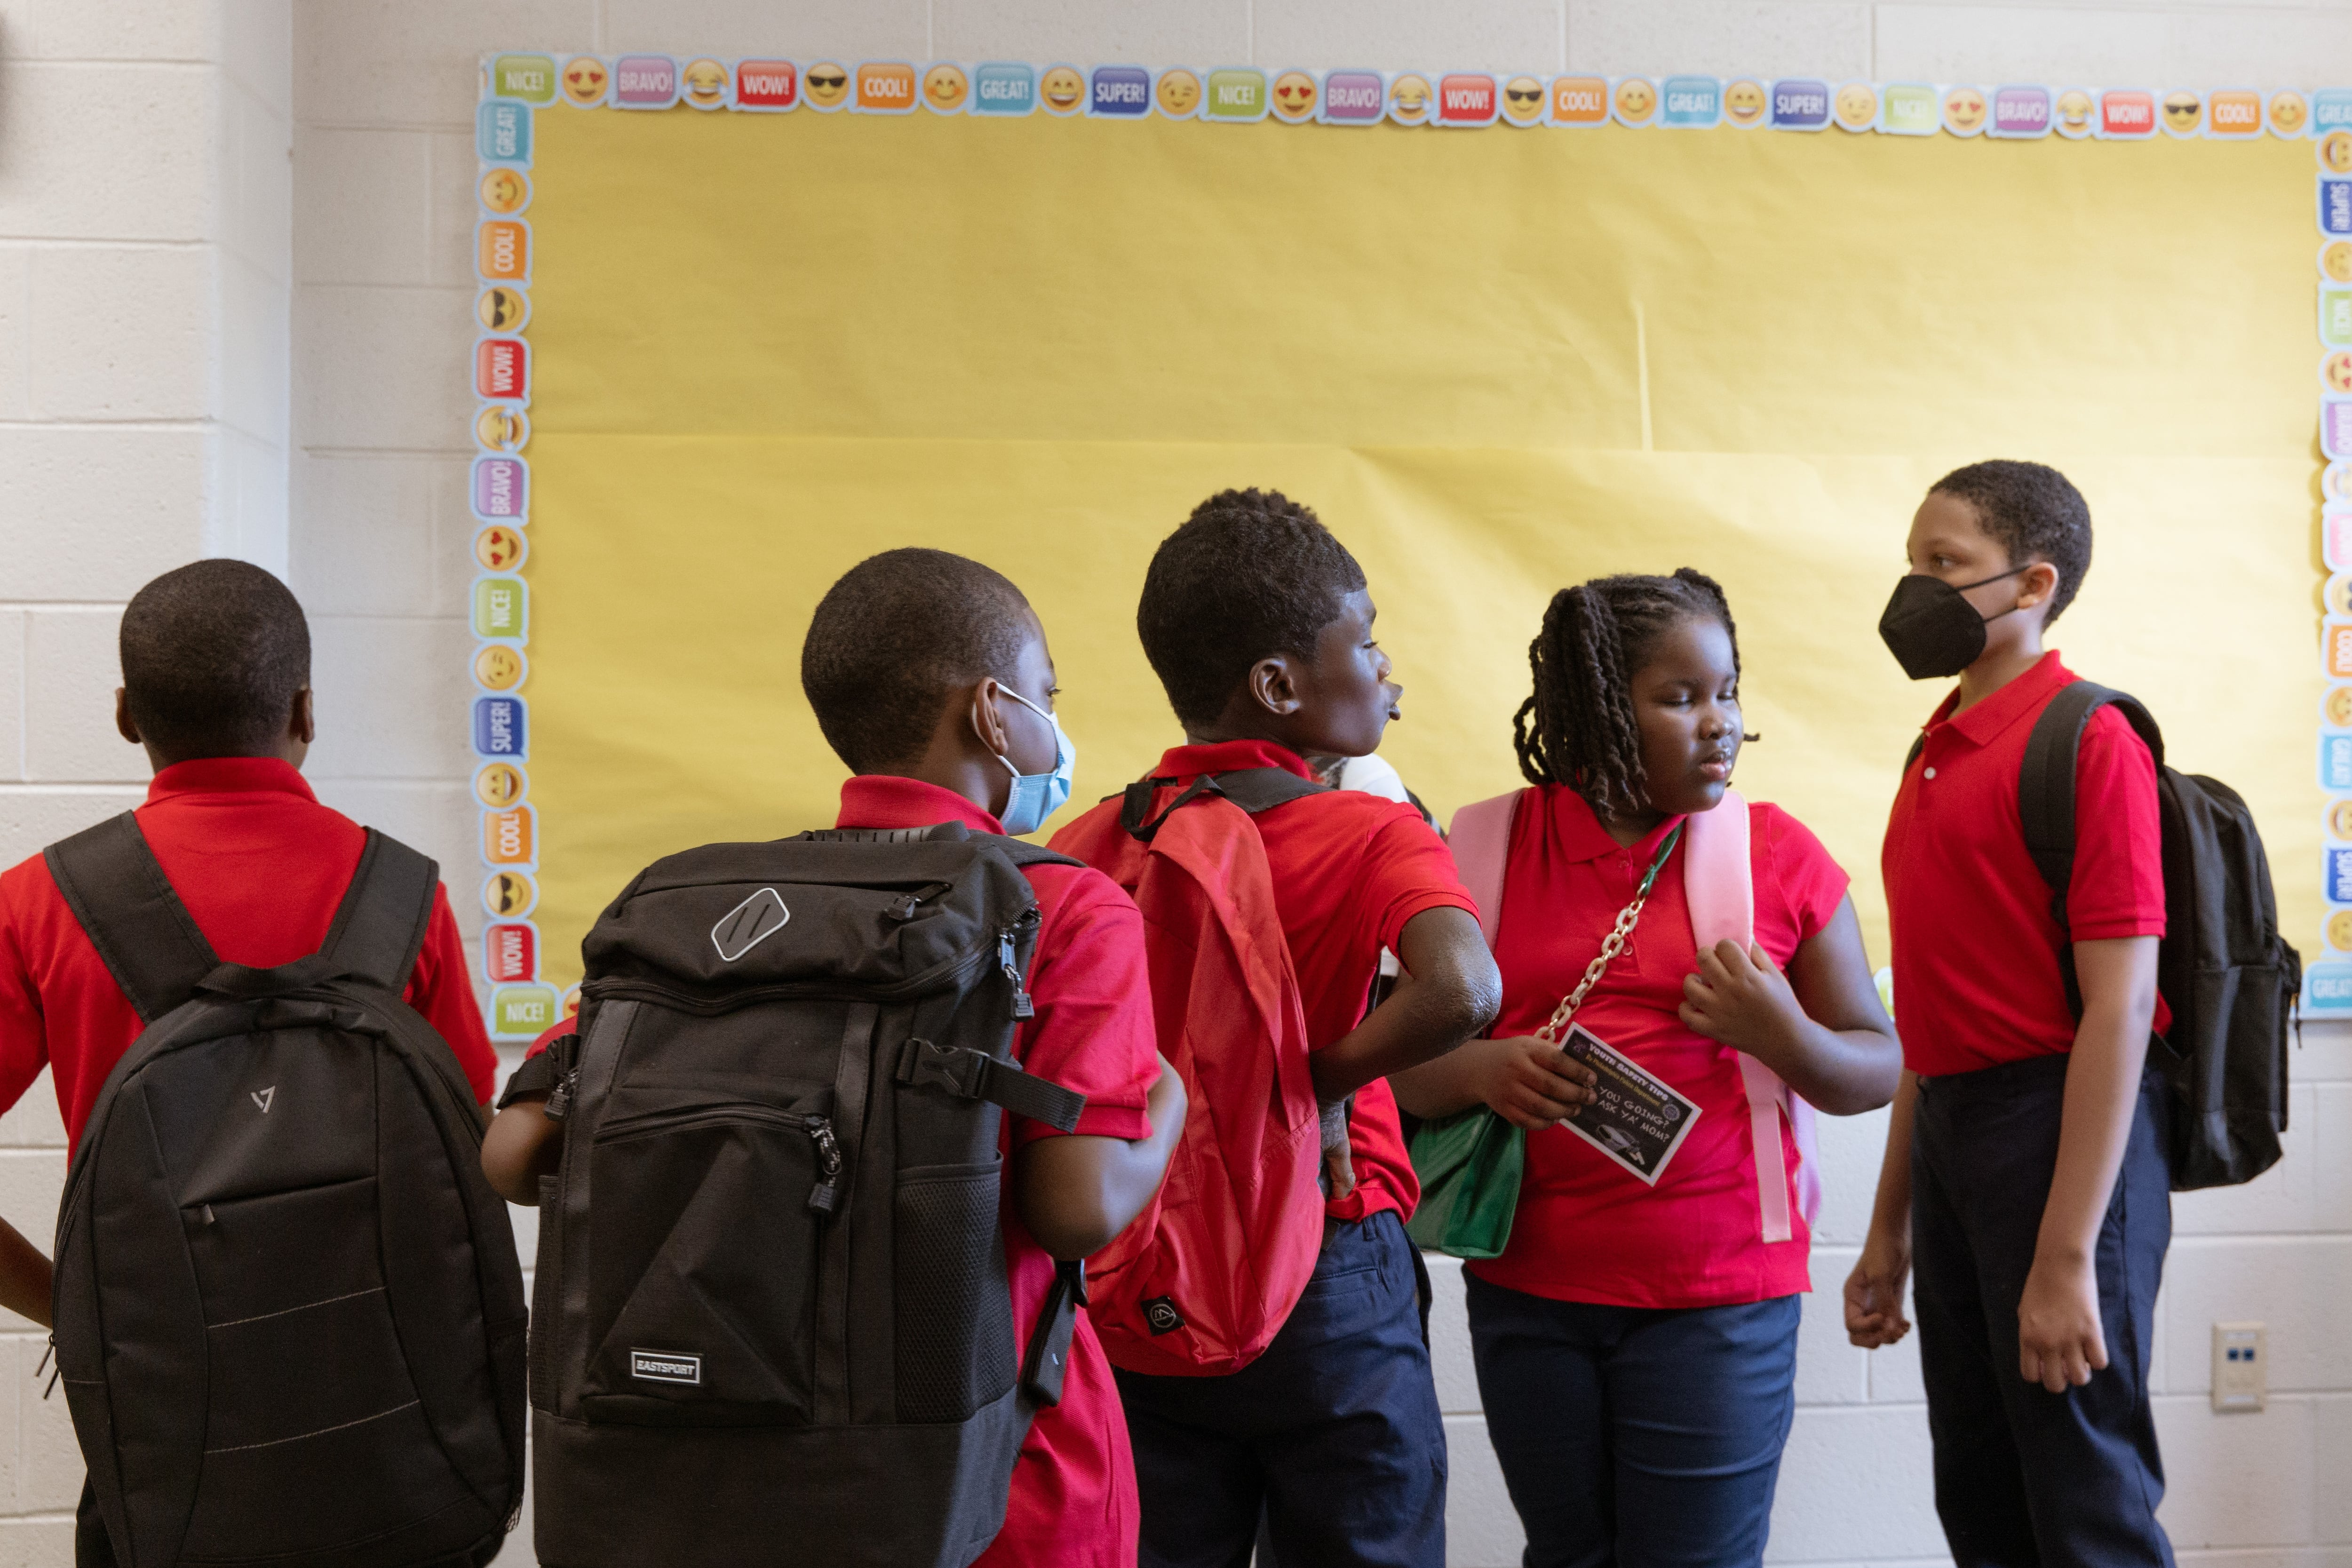 Five students wearing red and black uniforms stand in a hallway with their backpacks on and a giant yellow piece of paper on the wall in the background.